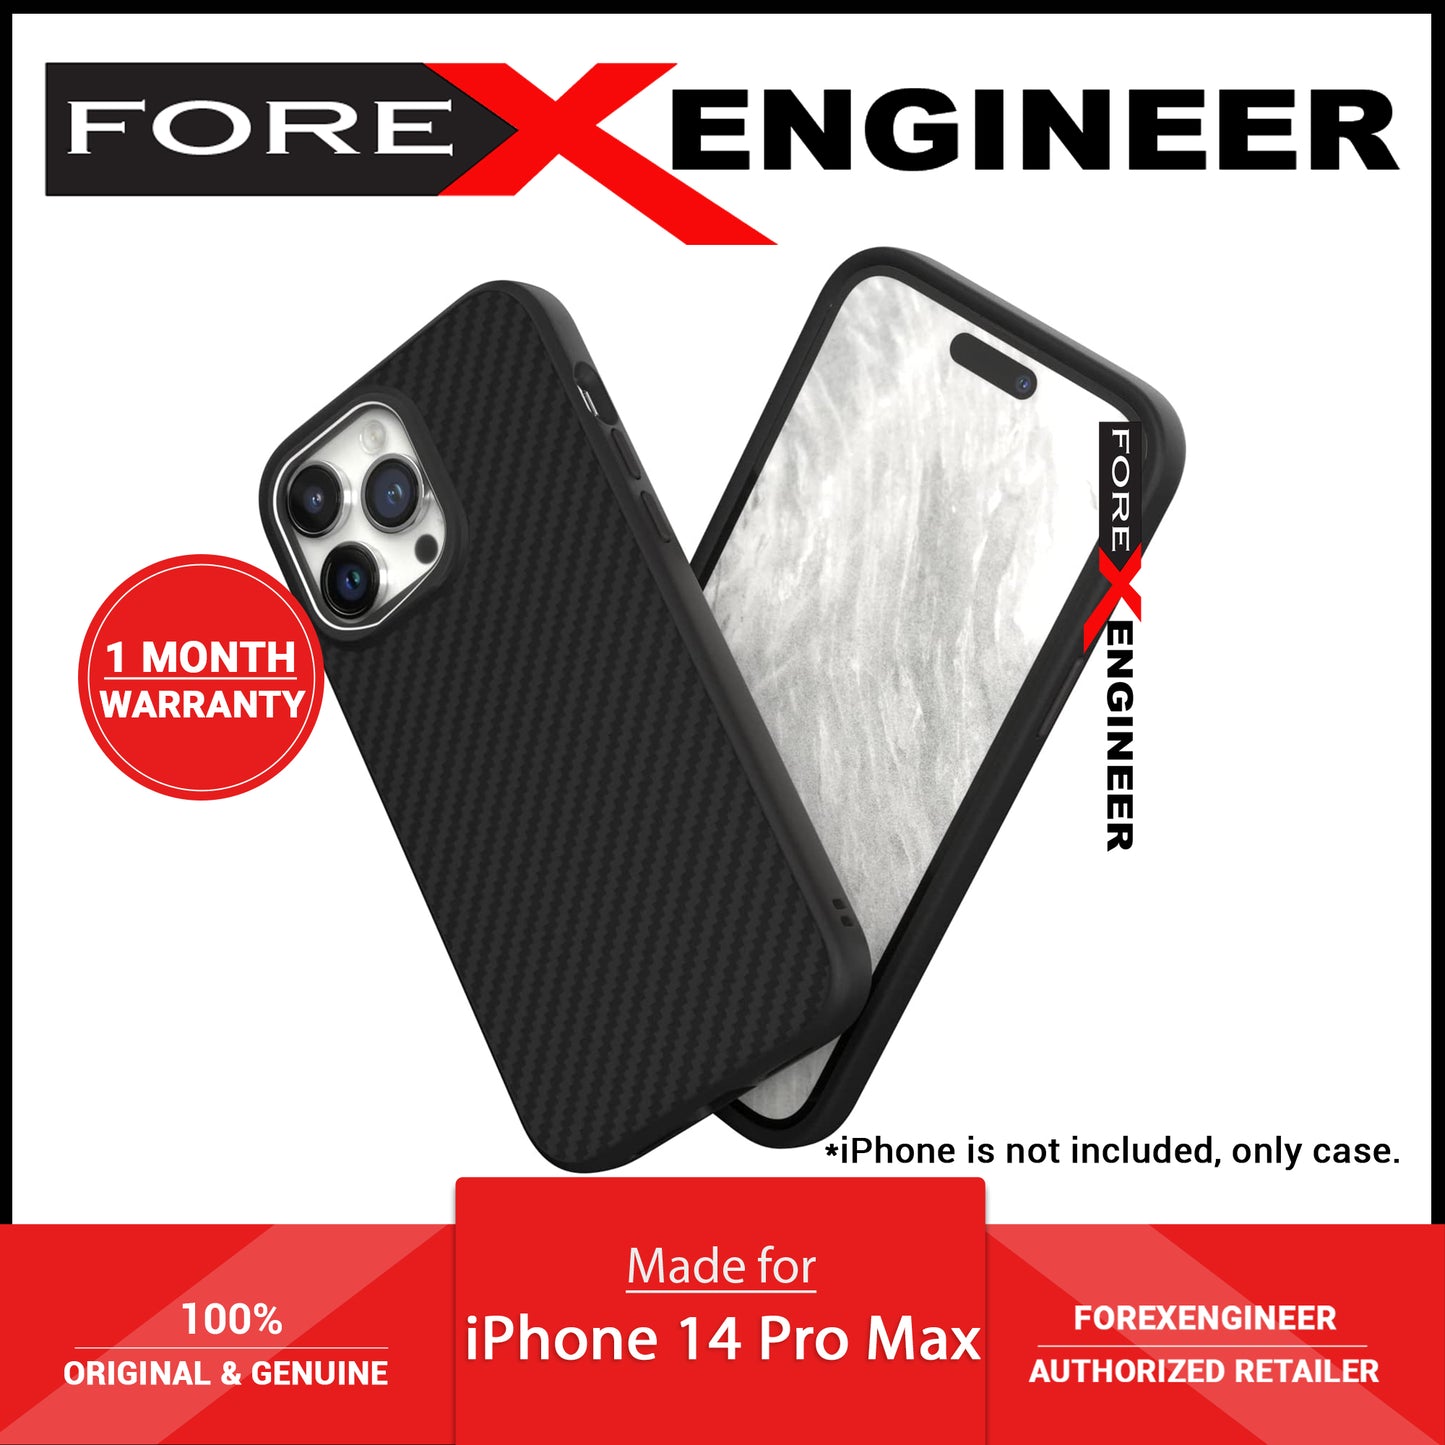 Rhinoshield SolidSuit Case for iPhone 14 Pro Max - Carbon Fiber ( Barcode: 4711366104870 )